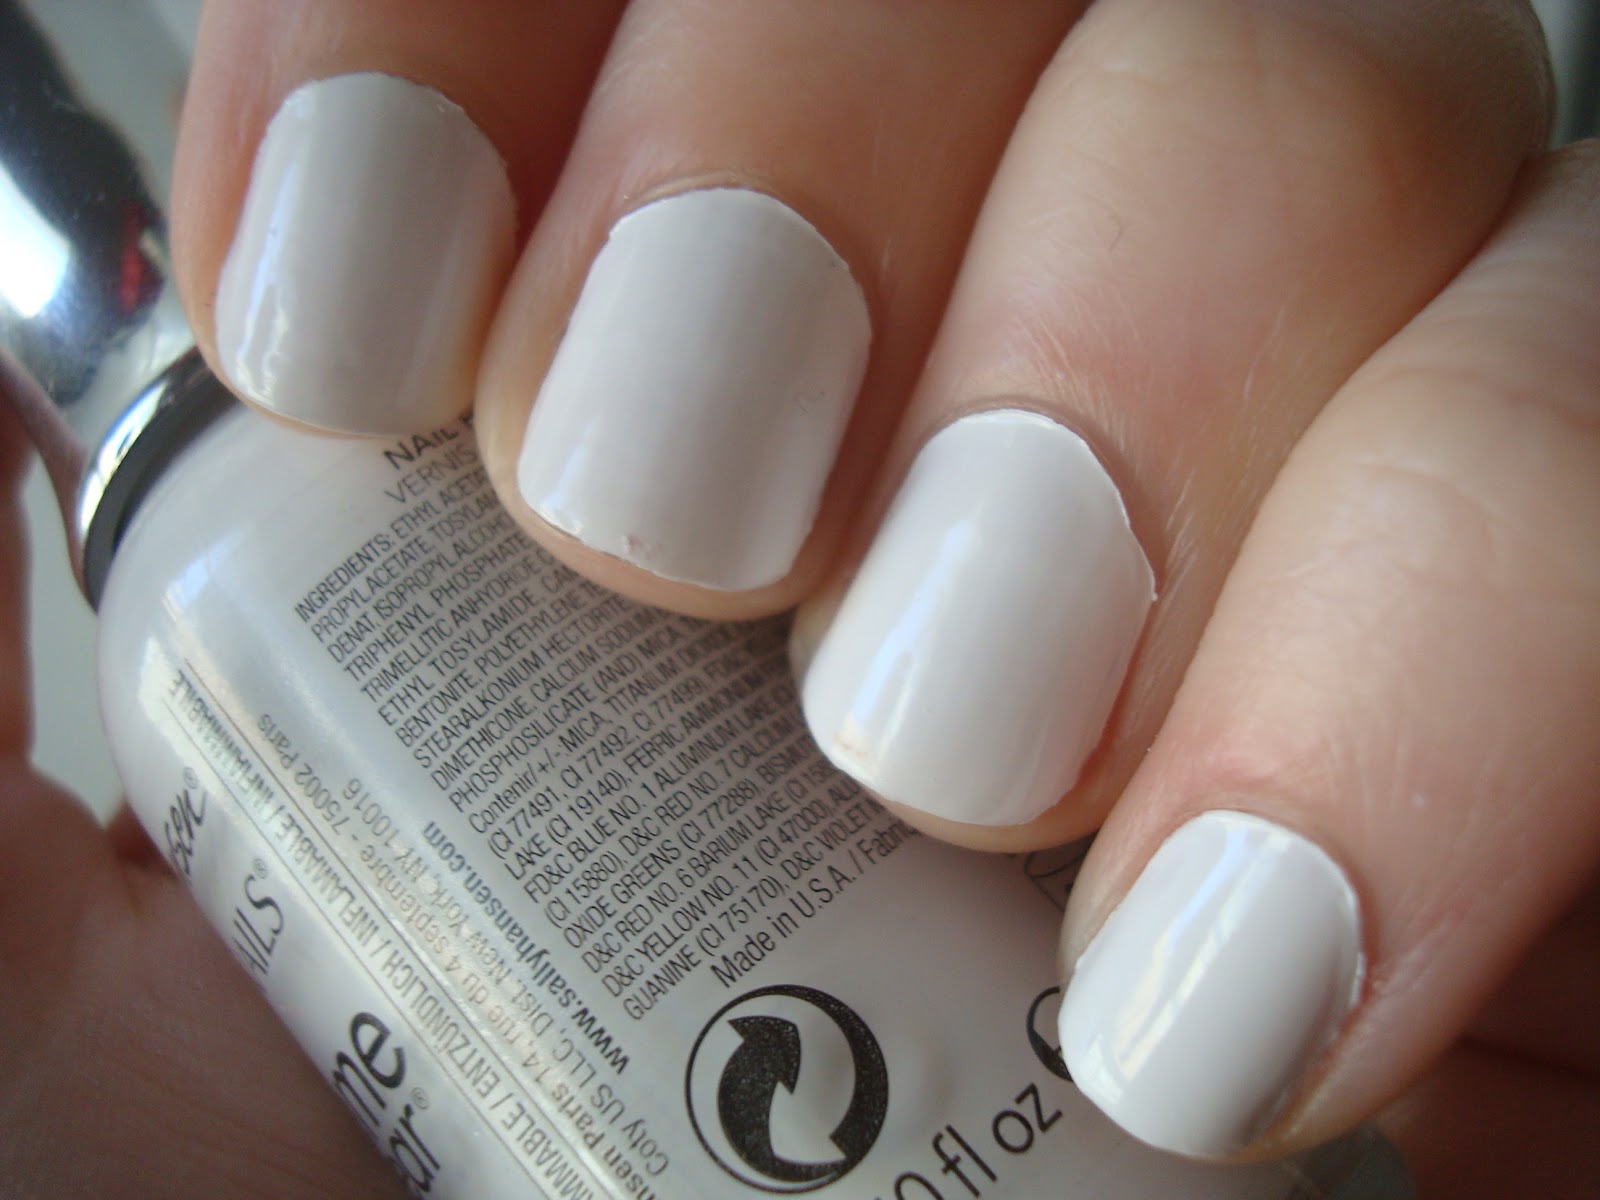 3. Sally Hansen Hard as Nails Xtreme Wear in "White On" - wide 4